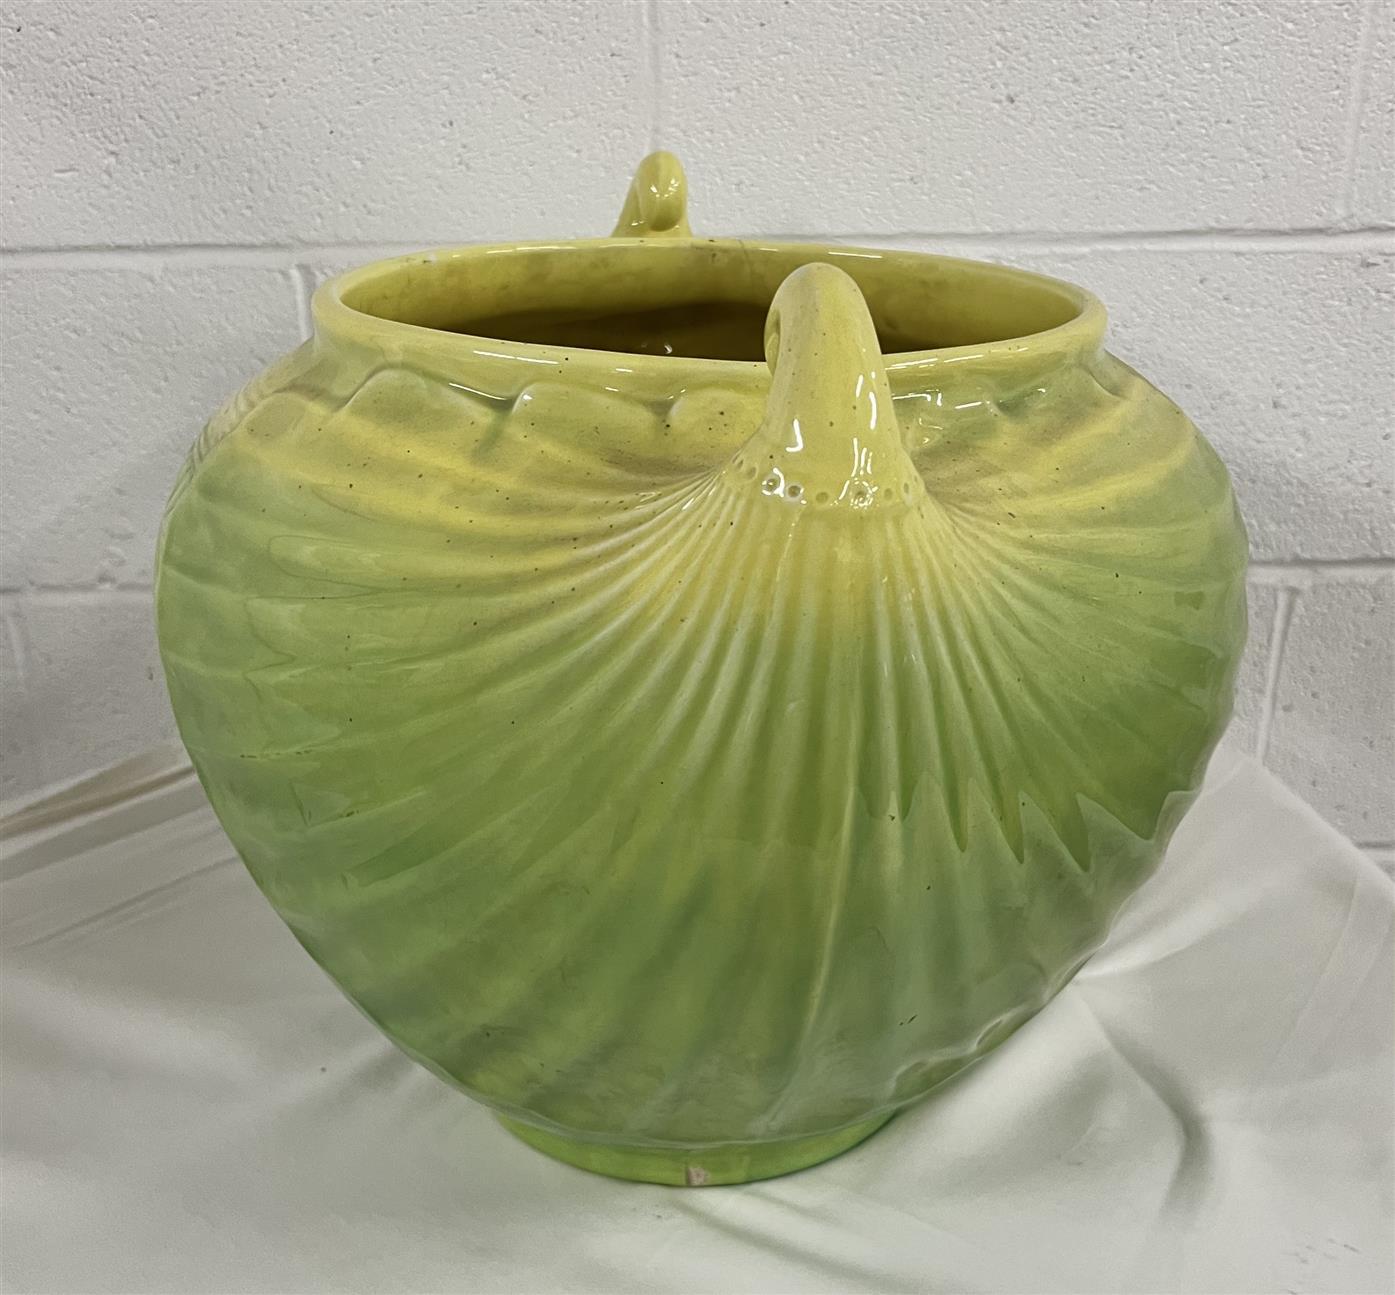 Beautiful Art Nouveau Ceramic Cachepot in Green and Yellow by SCI Laveno
Italy c. 1910
Designed by Christopher Dresser 